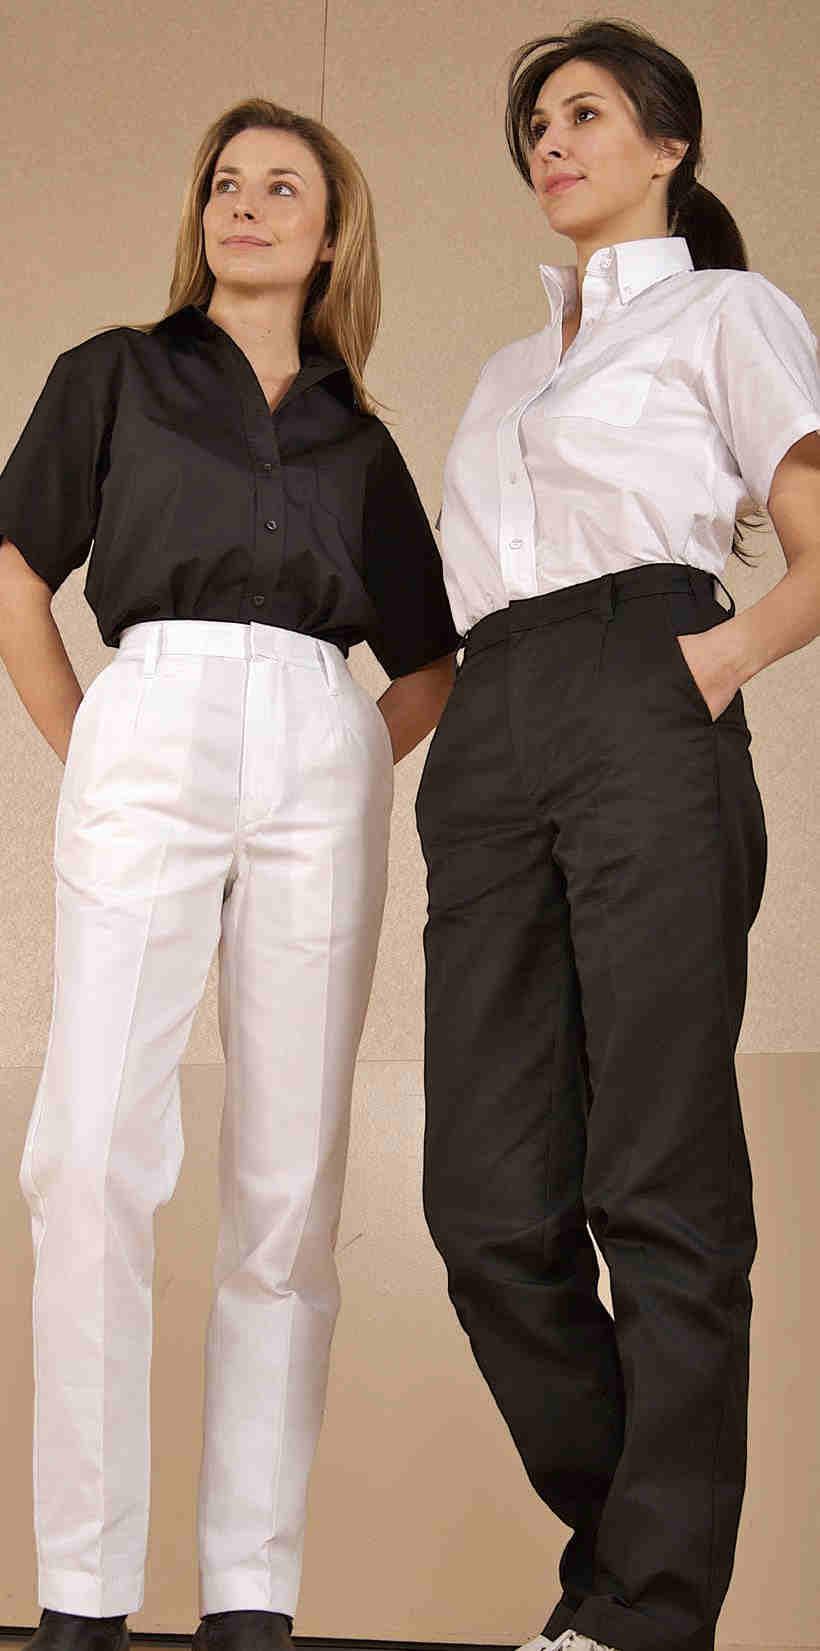 Women s PANTS We make finding the right fit for the right job easier with work pants designed with the preferred features women demand in an allin-one workplace solution.